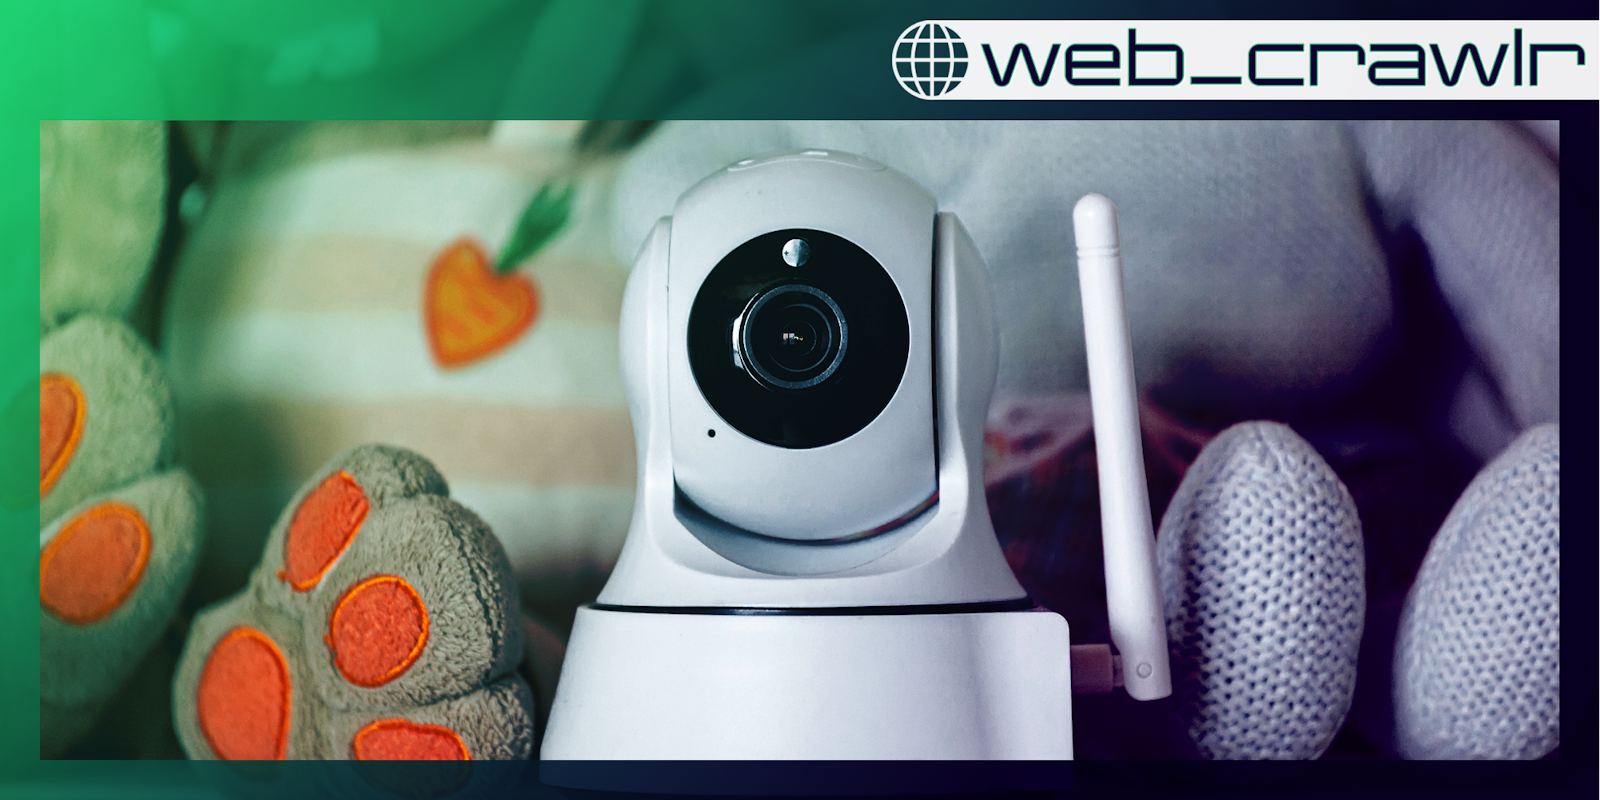 A baby monitor next to stuffed animals. The Daily Dot newsletter web_crawlr logo is in the top right corner.